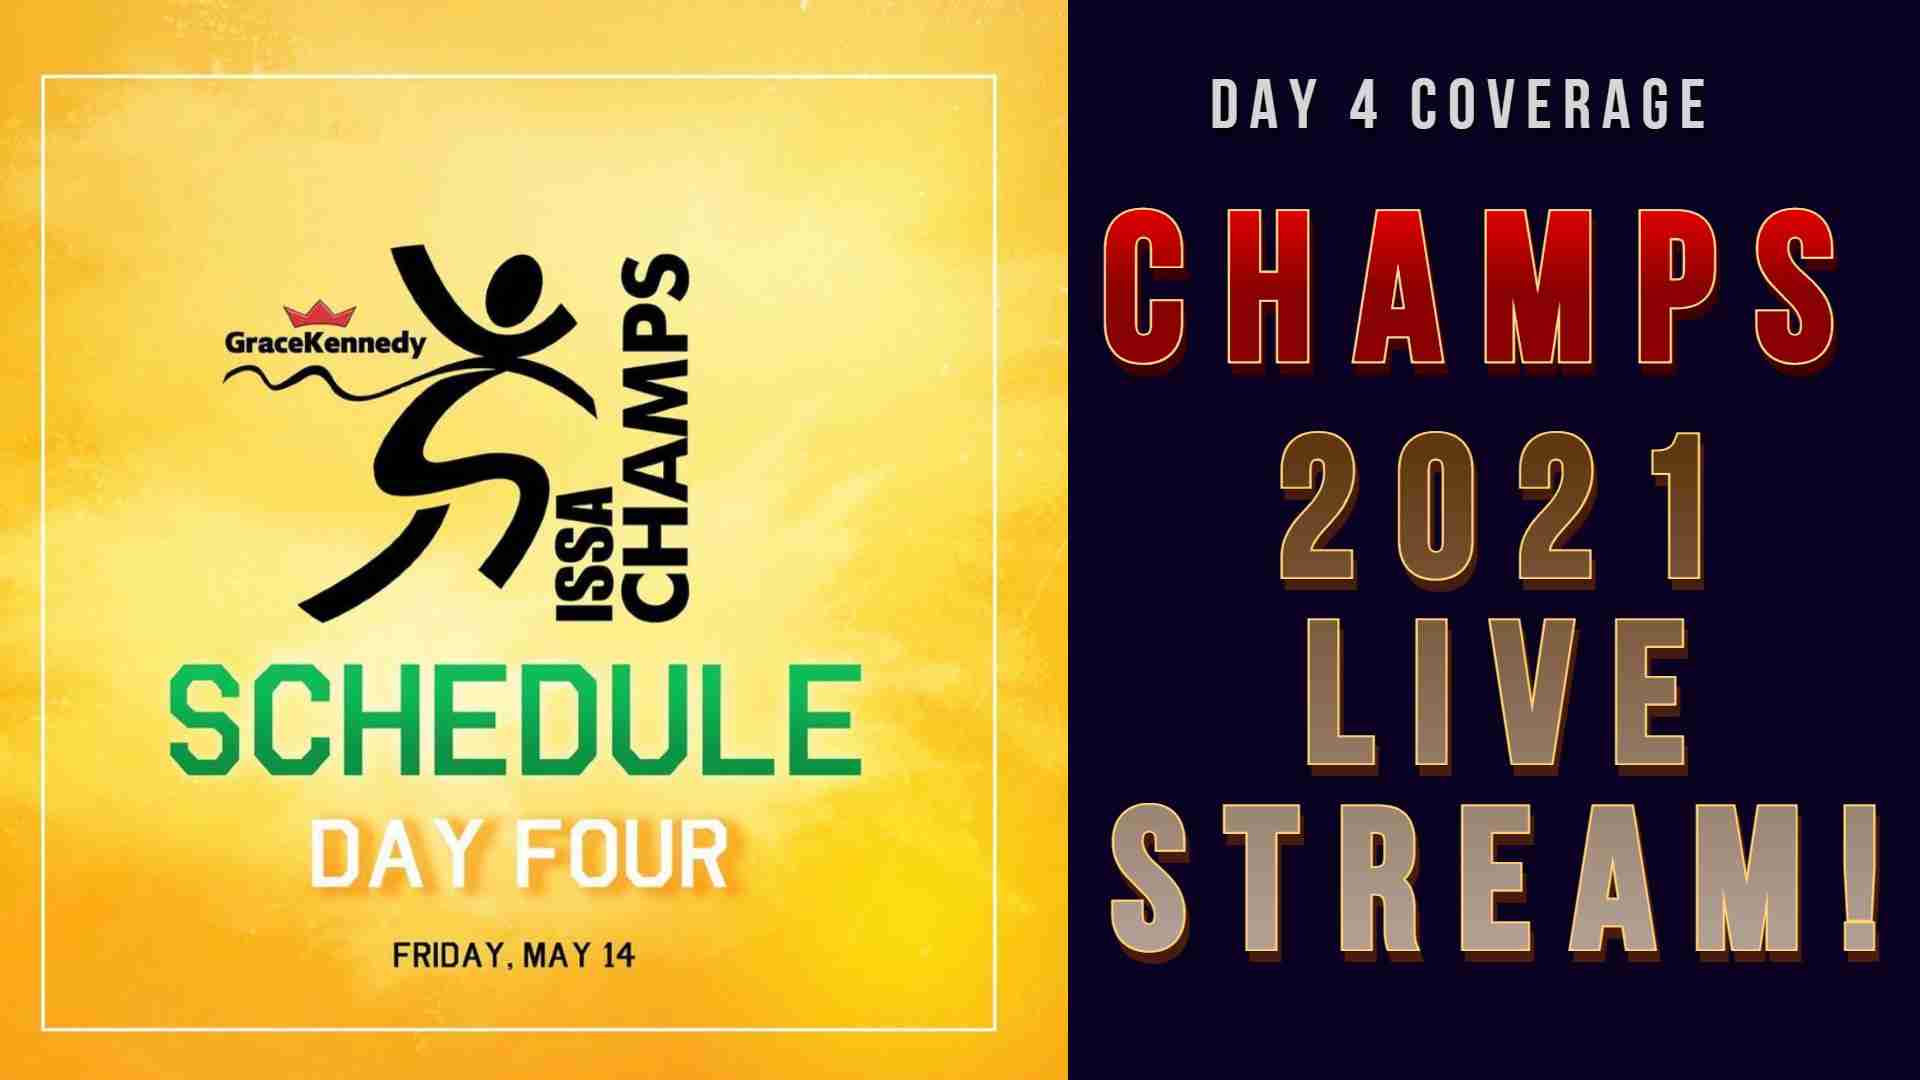 Champs 2021 Day 4 schedule of events and live streaming